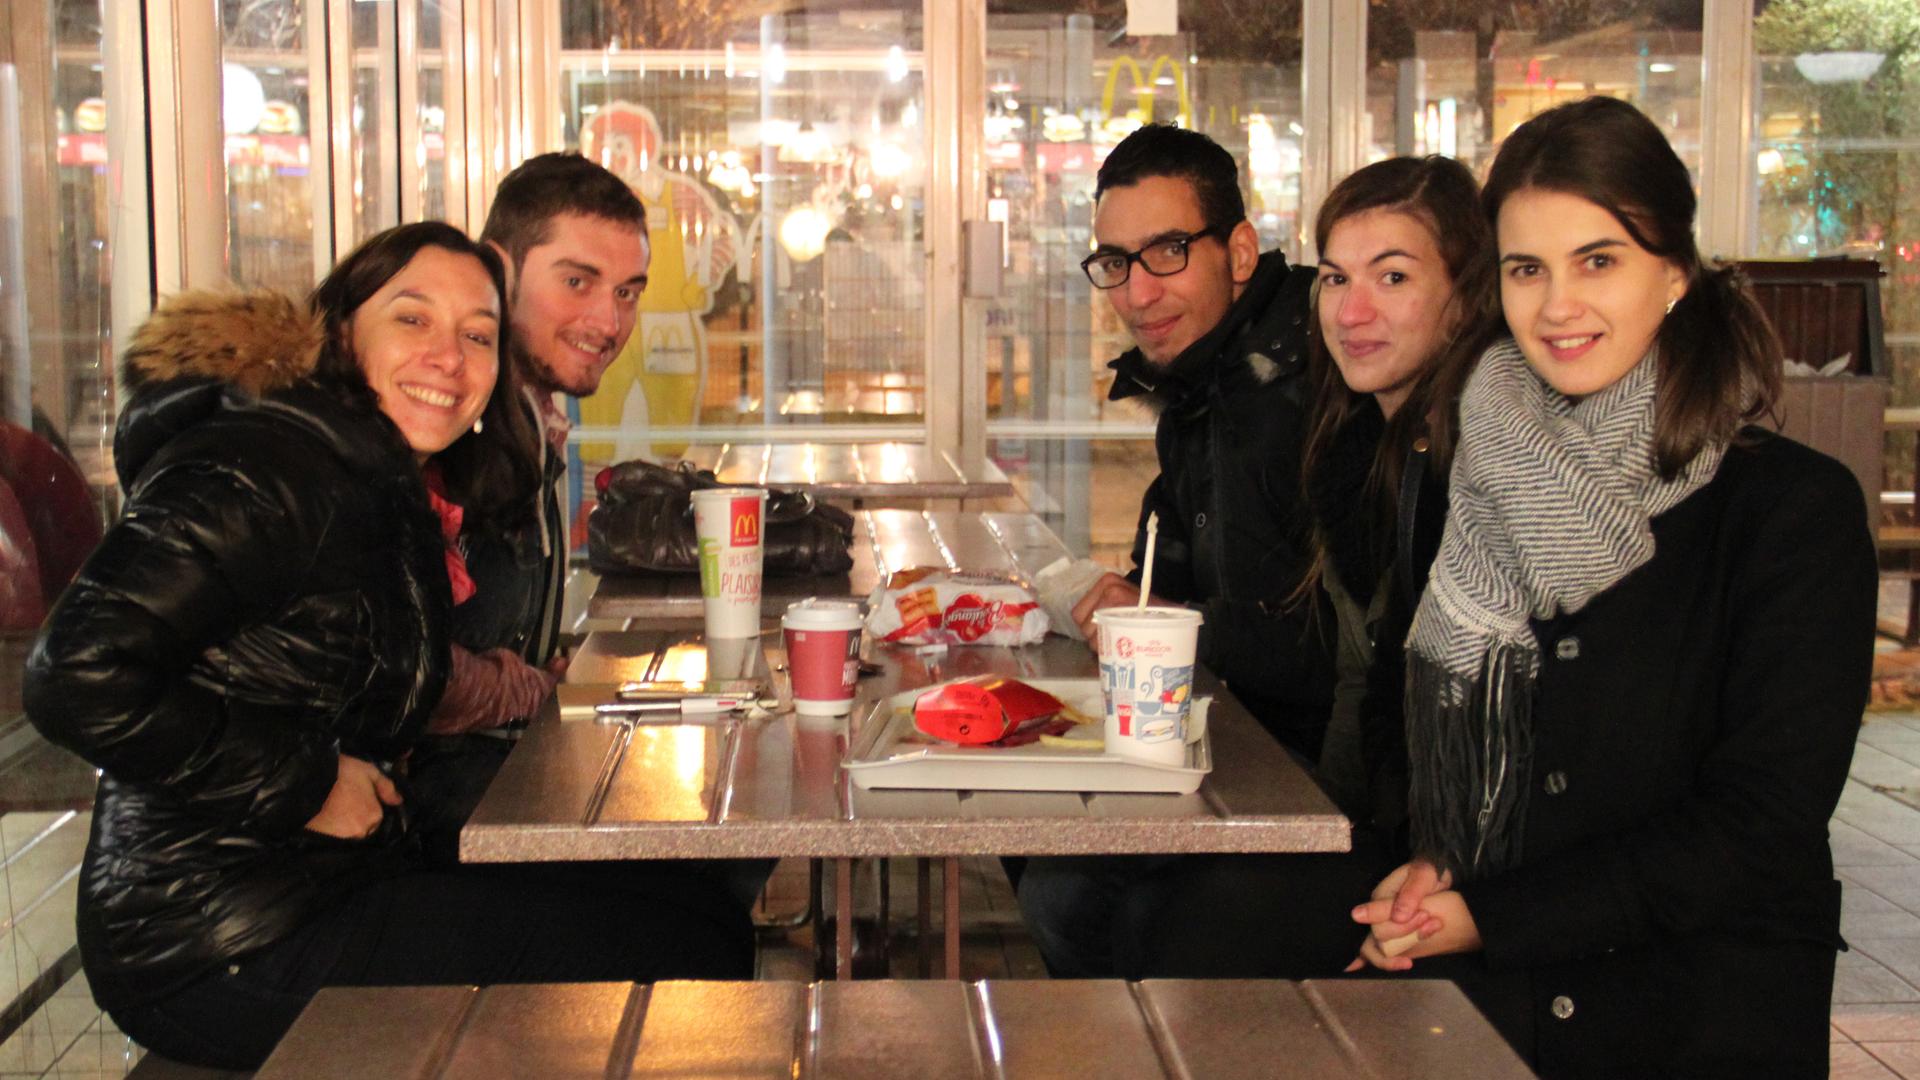 McDonalds is one of the few places open on a Sunday night in the Paris suburb of Épinay-sur-Seine. (Clockwise from left: Angeline Rochery and former students, Steven dos Santos, Samir Saïfi, Laeticia Rodrigues, Cristina Riscou)